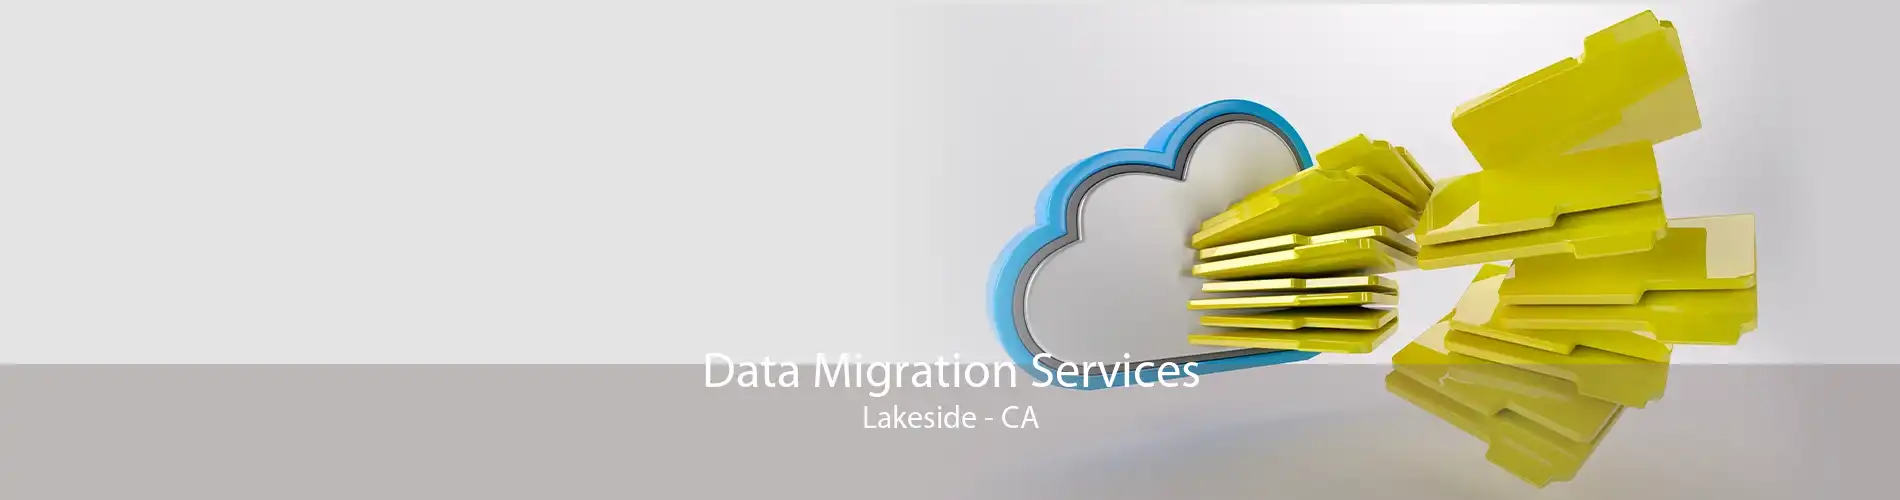 Data Migration Services Lakeside - CA